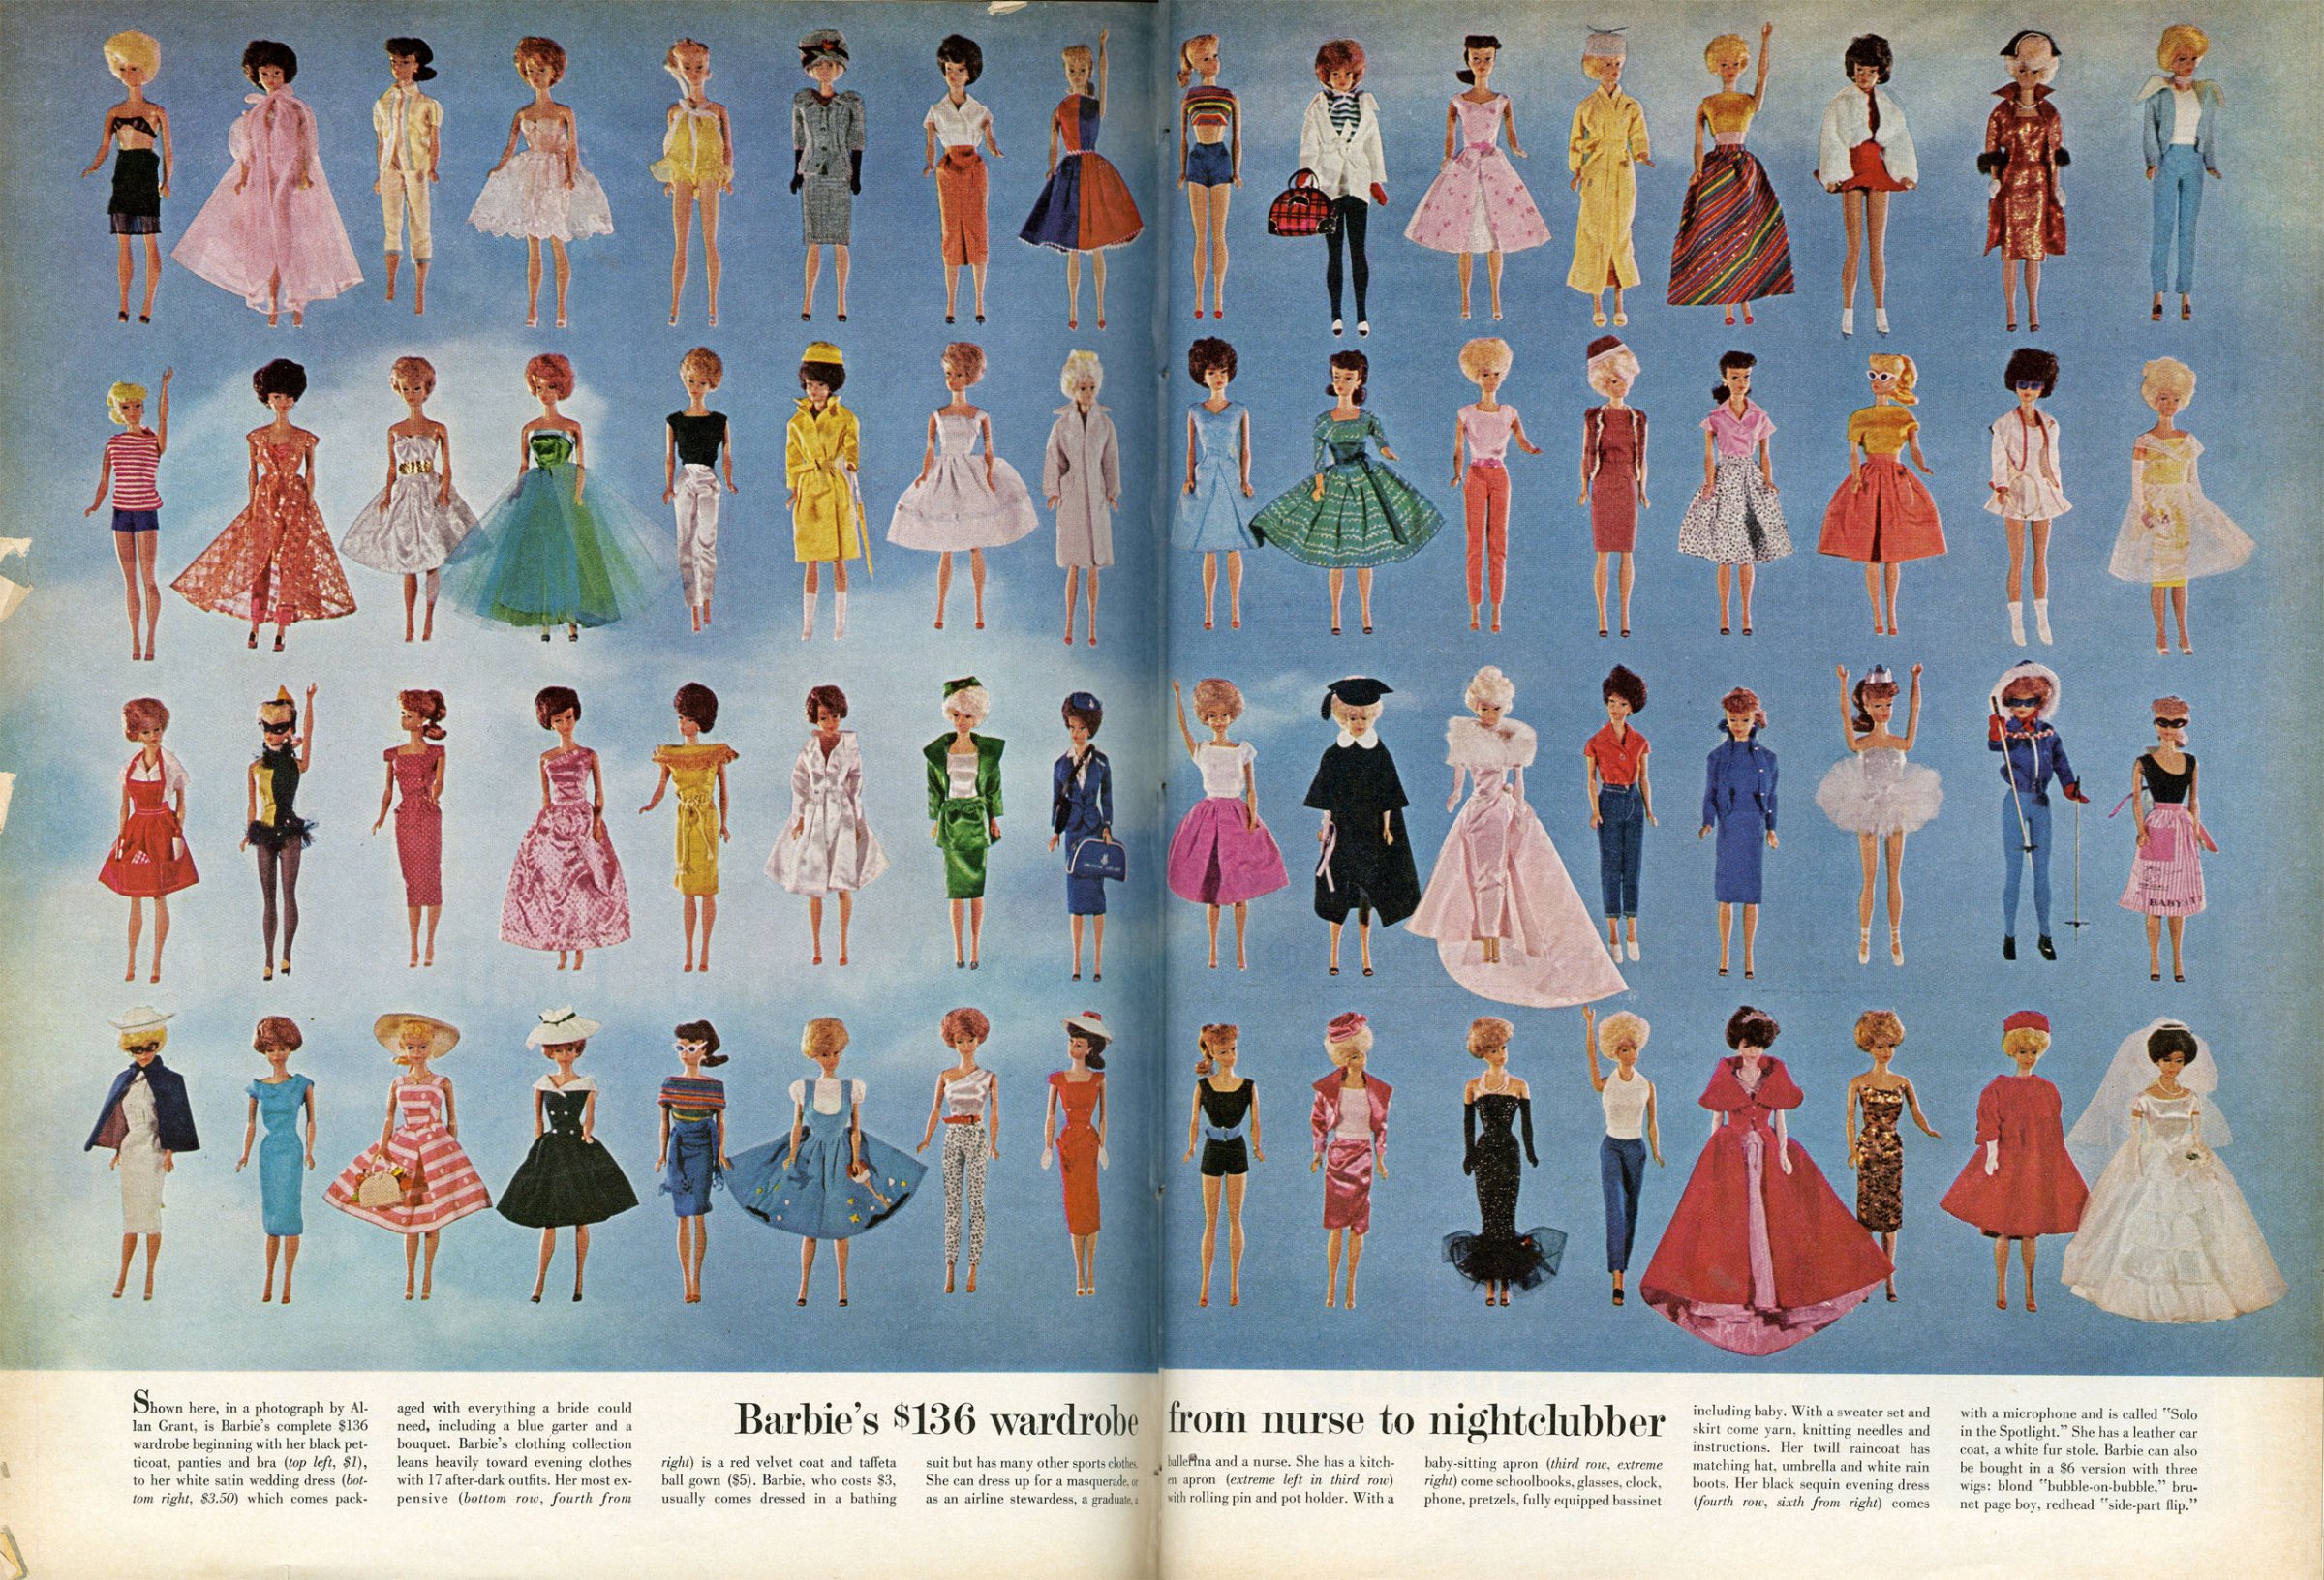 August 23, 1963 Life Magazine spread about Barbie